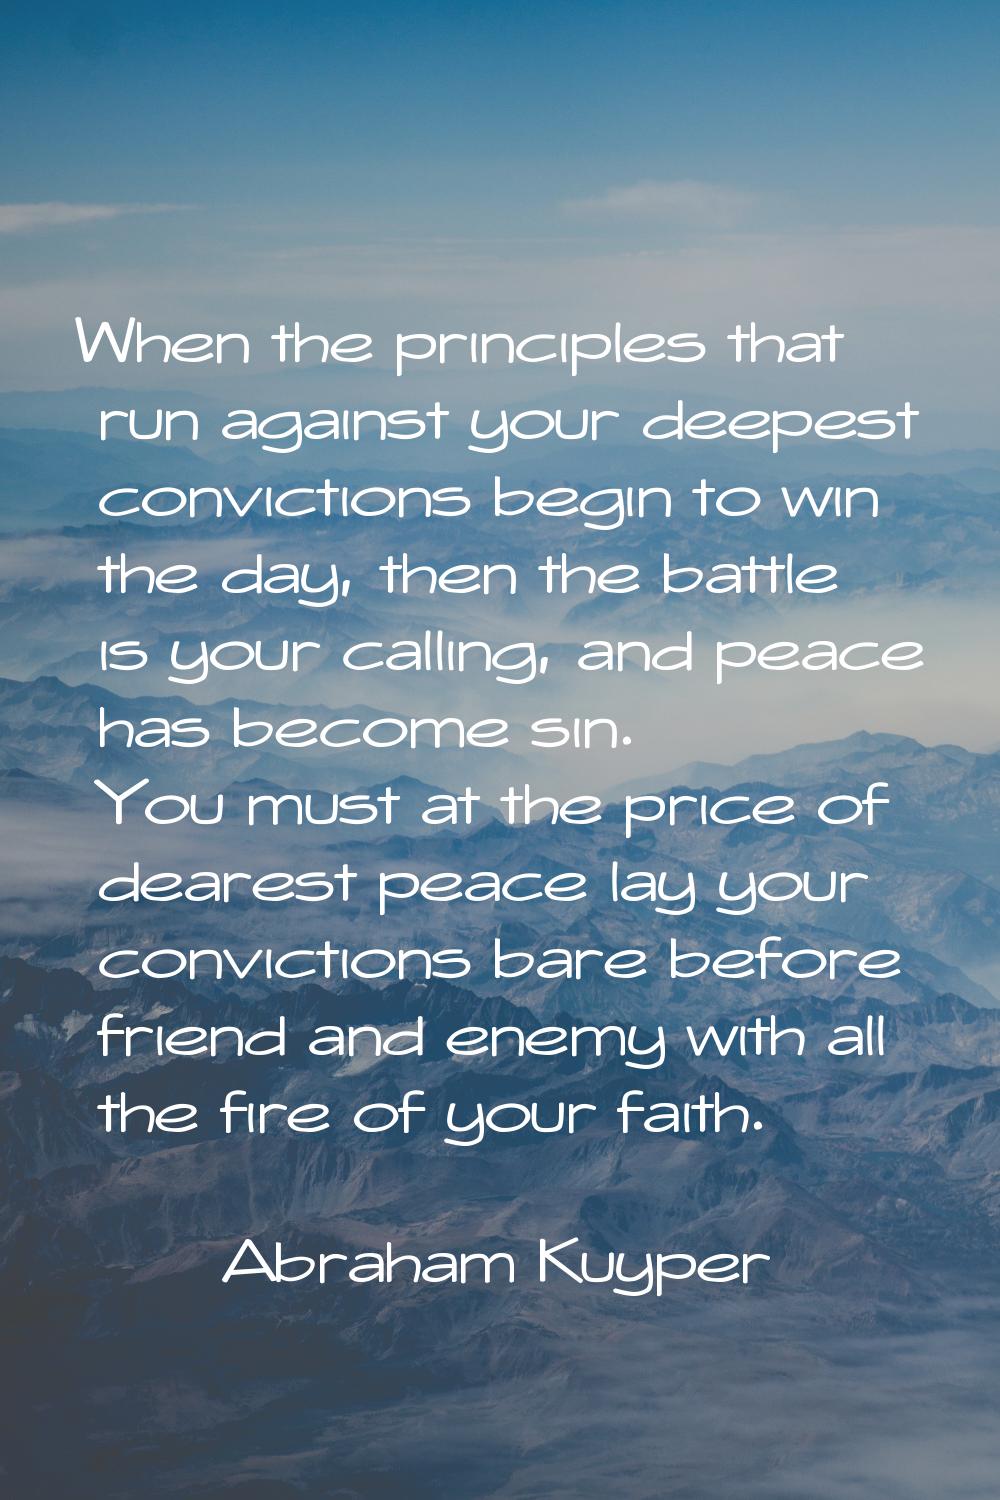 When the principles that run against your deepest convictions begin to win the day, then the battle